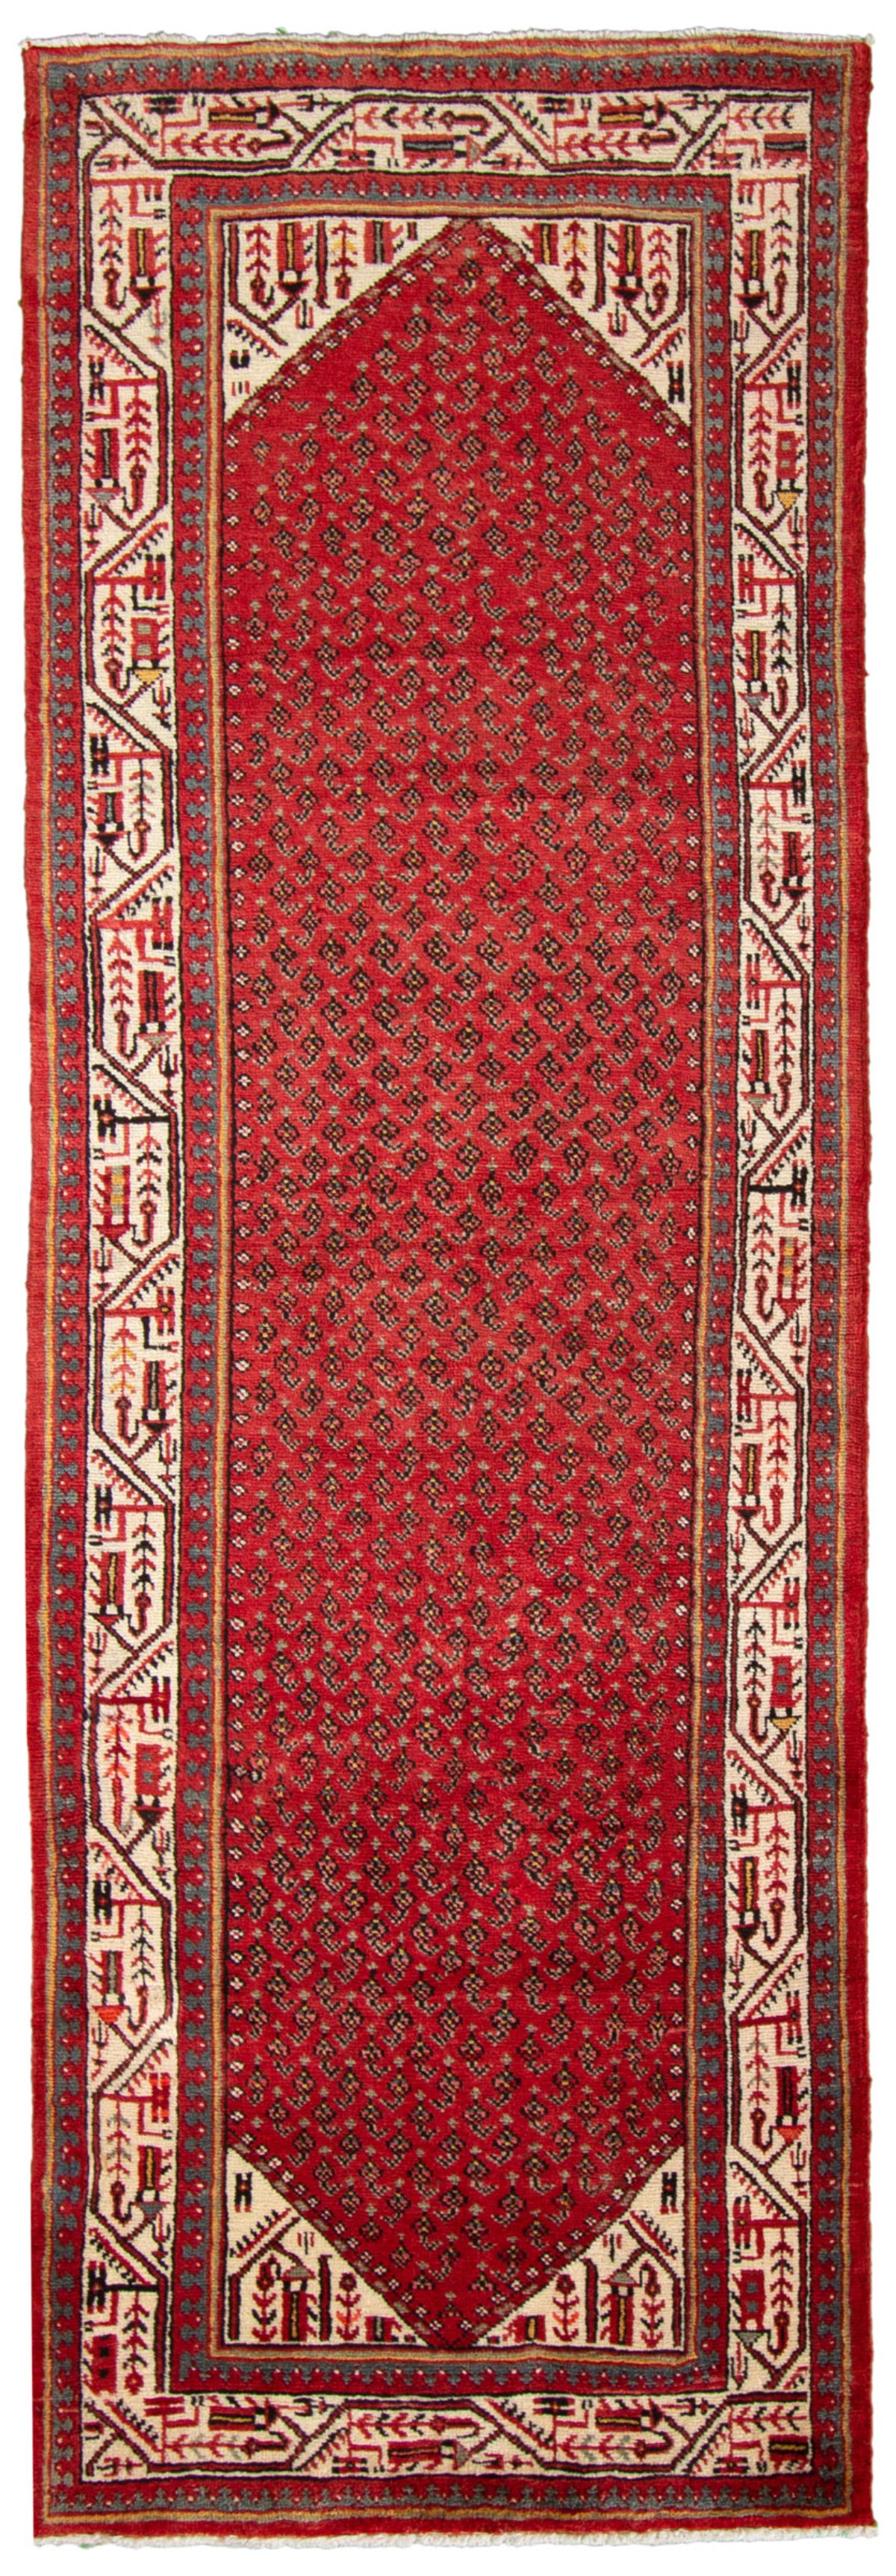 Hand-knotted Arak Red Wool Rug 3'5" x 10'3"  Size: 3'5" x 10'3"  